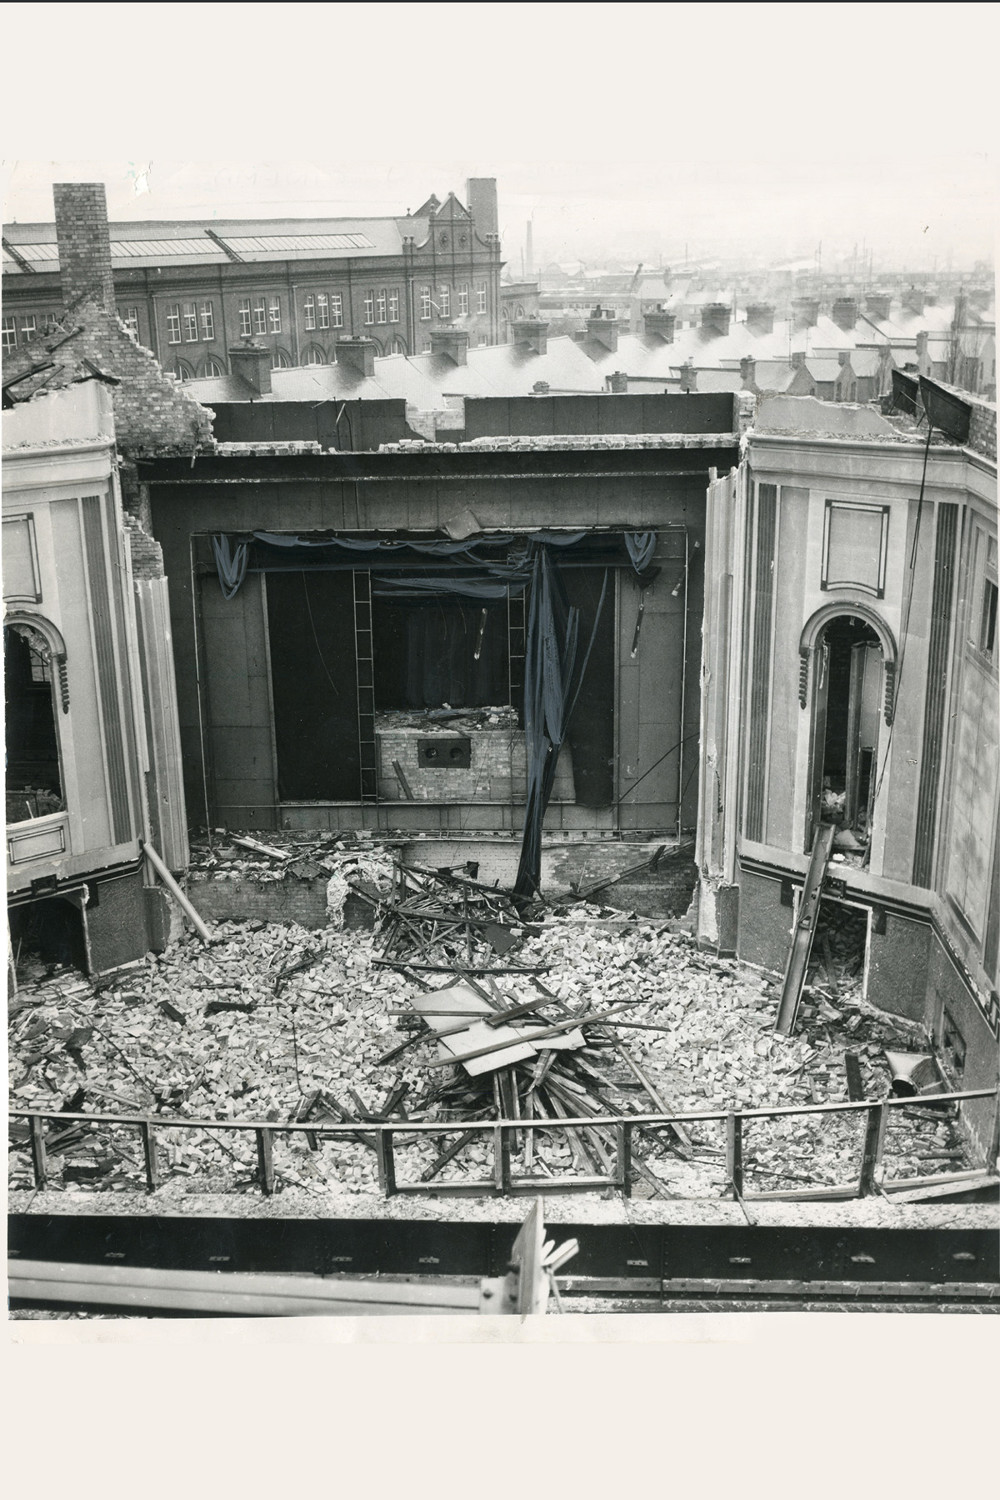 Demolition of Knighton Kinema. ©Leicester Mercury Archive at the University of Leicester.